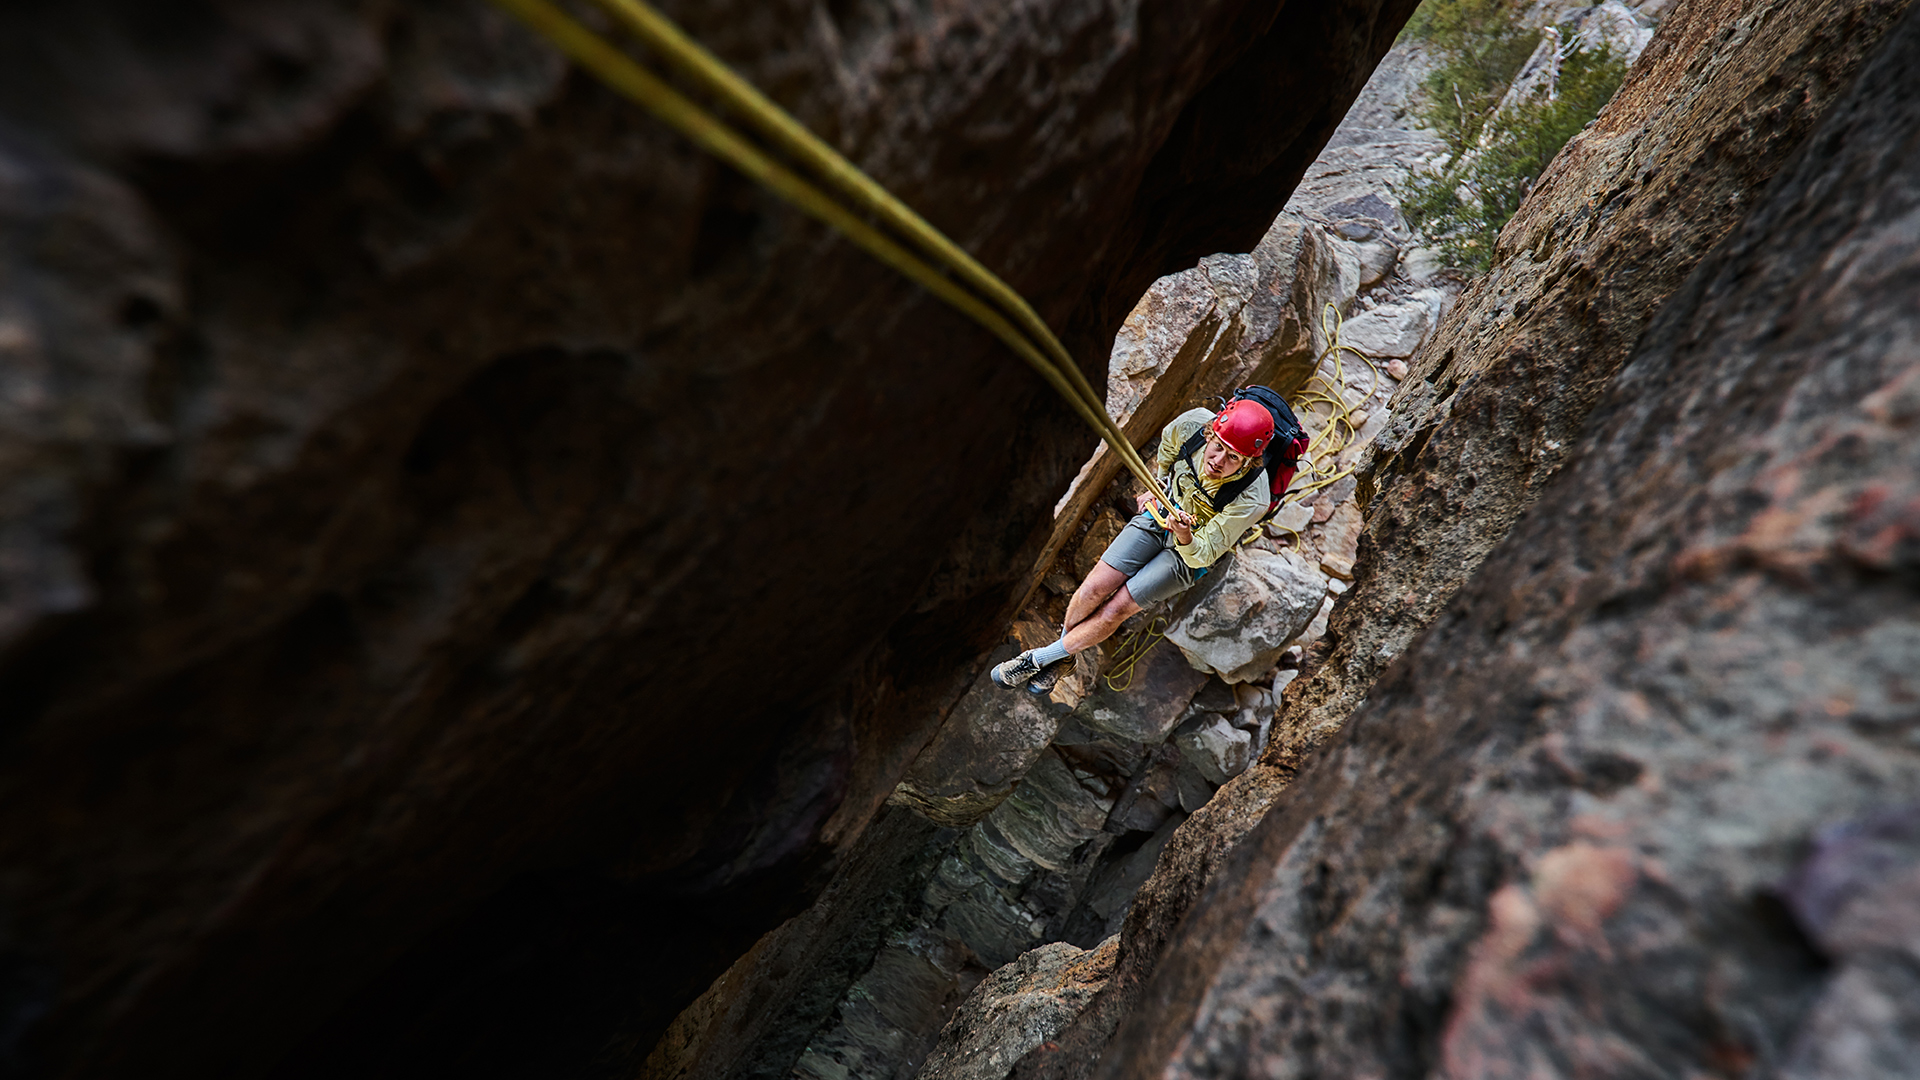 Full Day Multi-Pitch Abseiling Adventure With Lunch